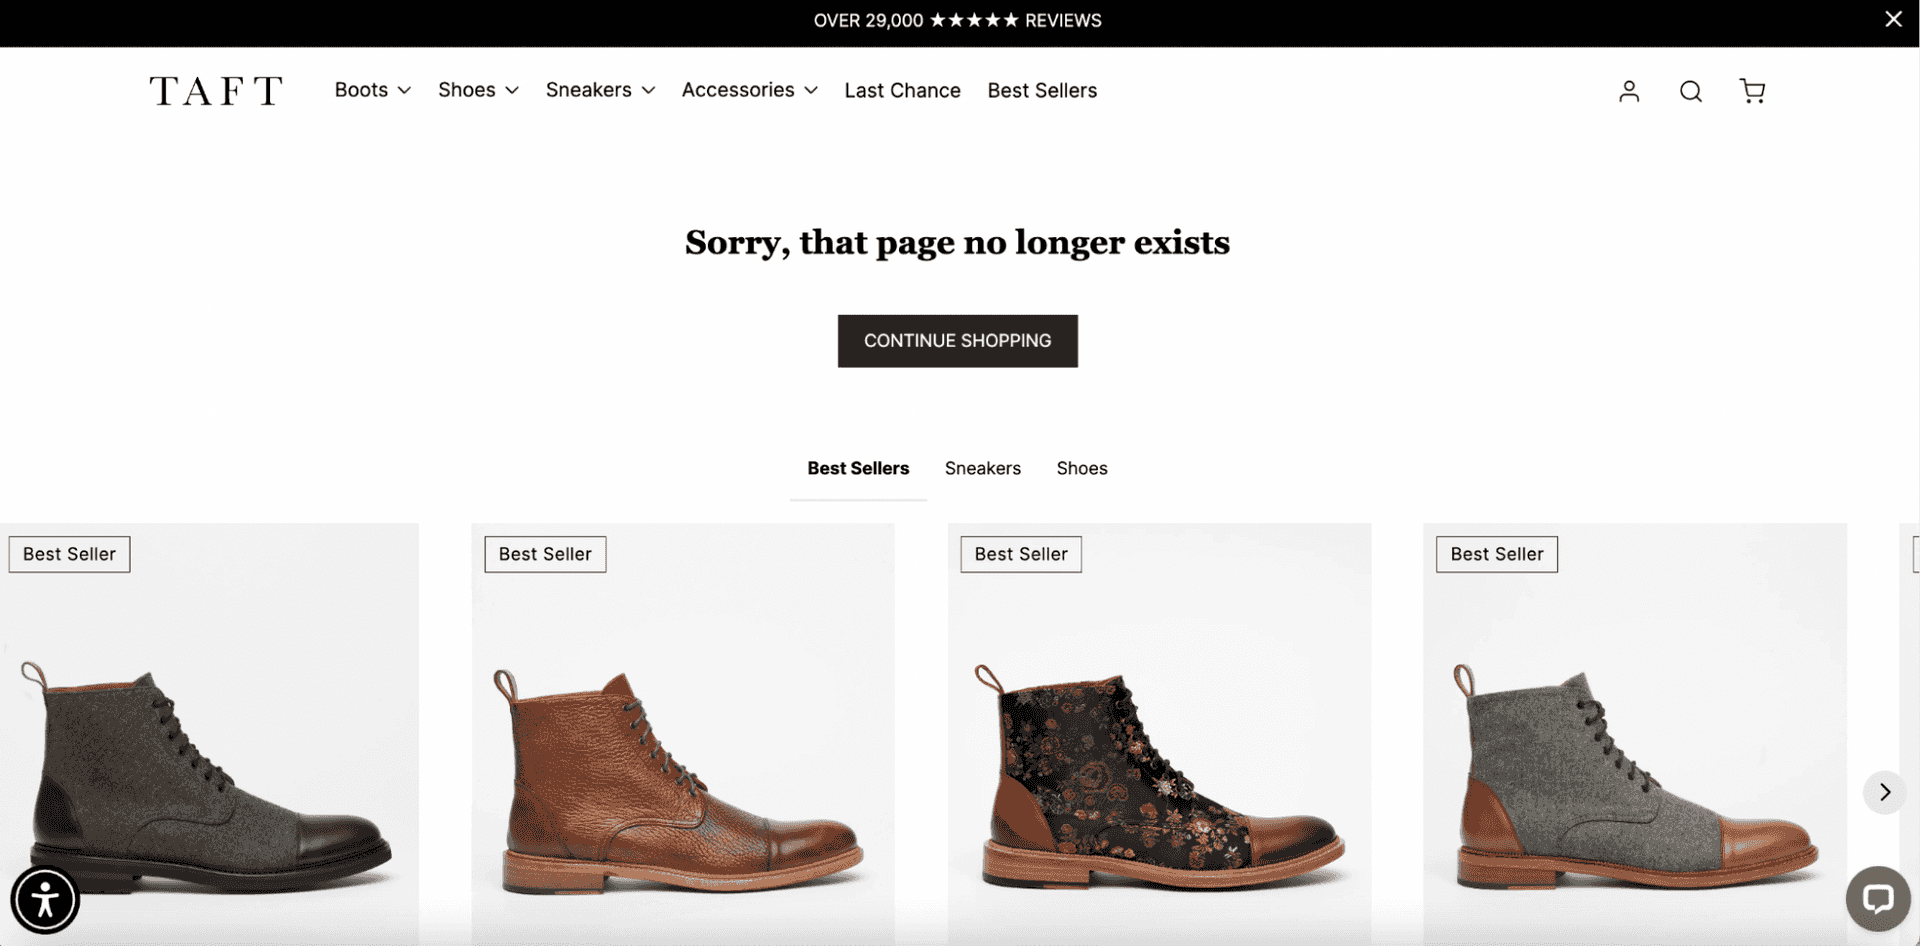 Taft Shoes 404 page